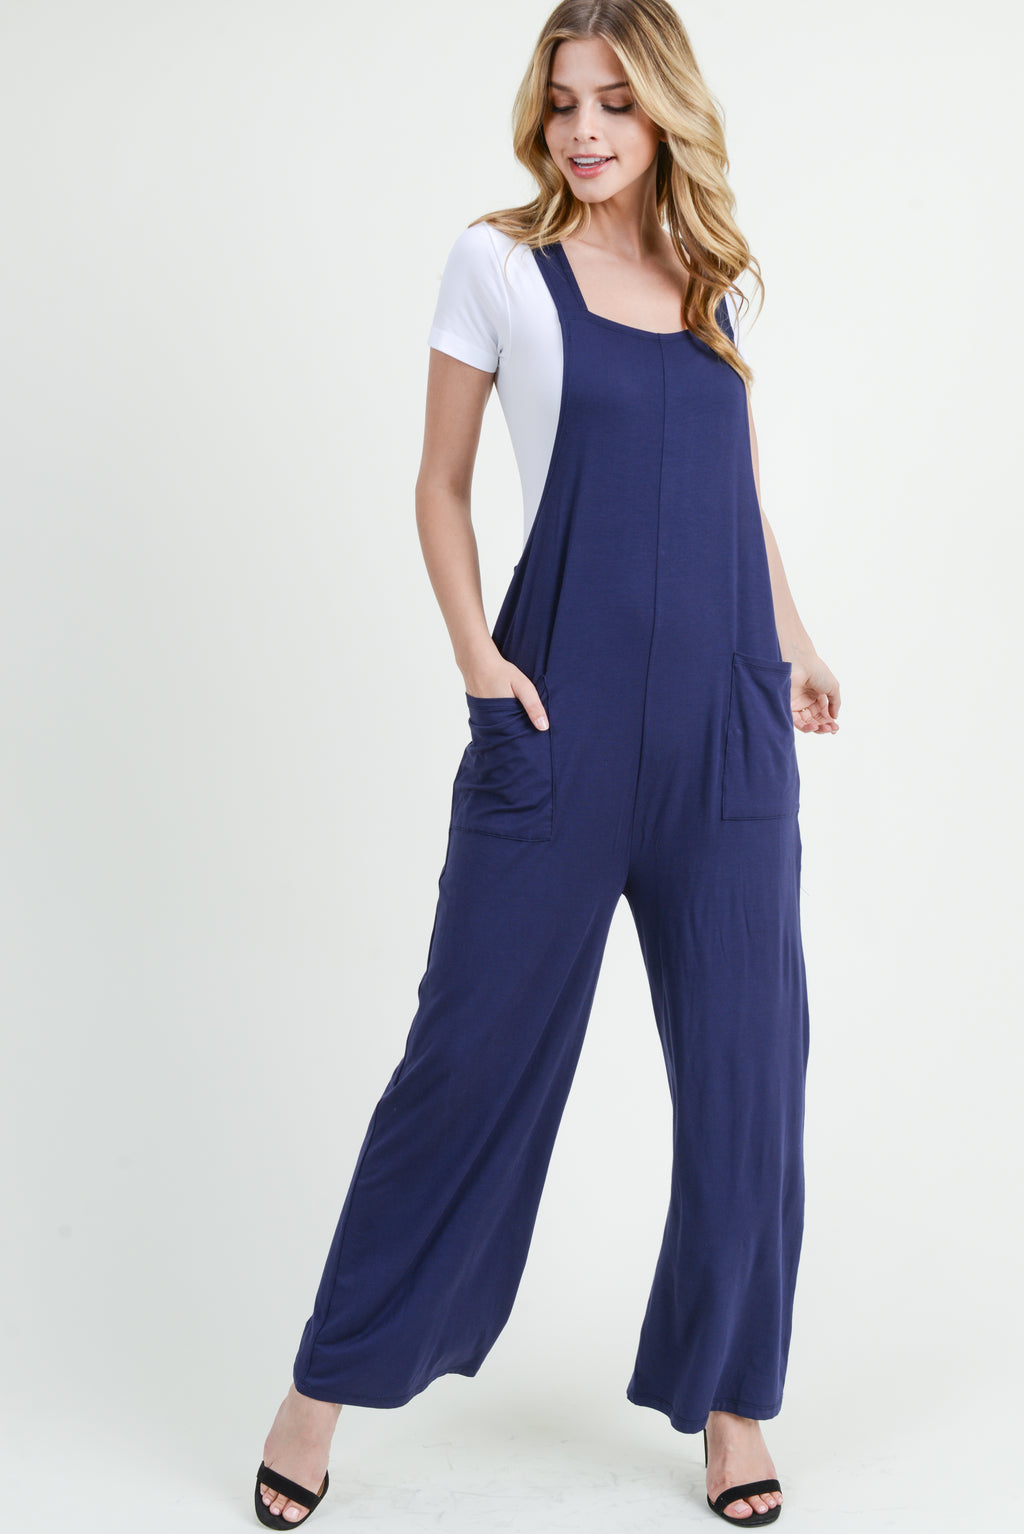 navy blue overalls with two pockets